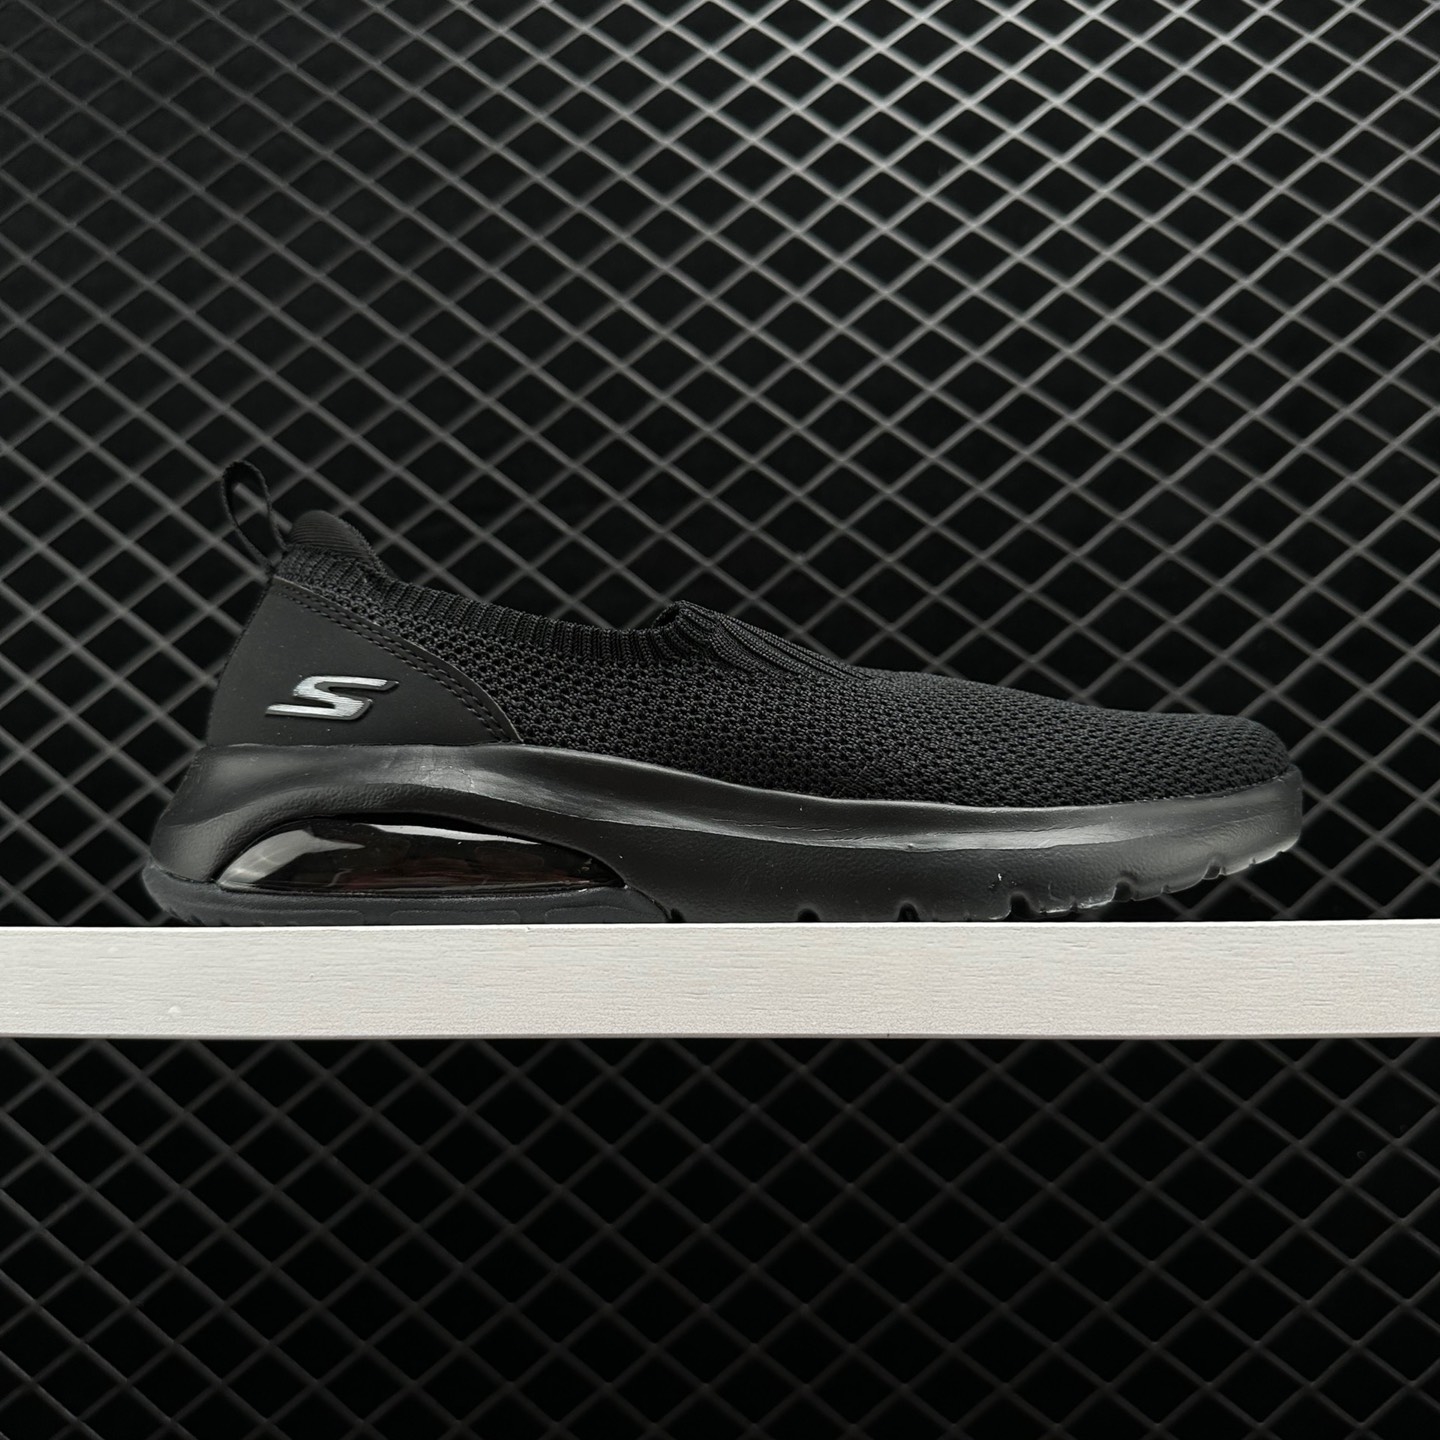 Skechers Go Walk Air Walking Shoes All Black - Superior comfort for fashionable walkers!